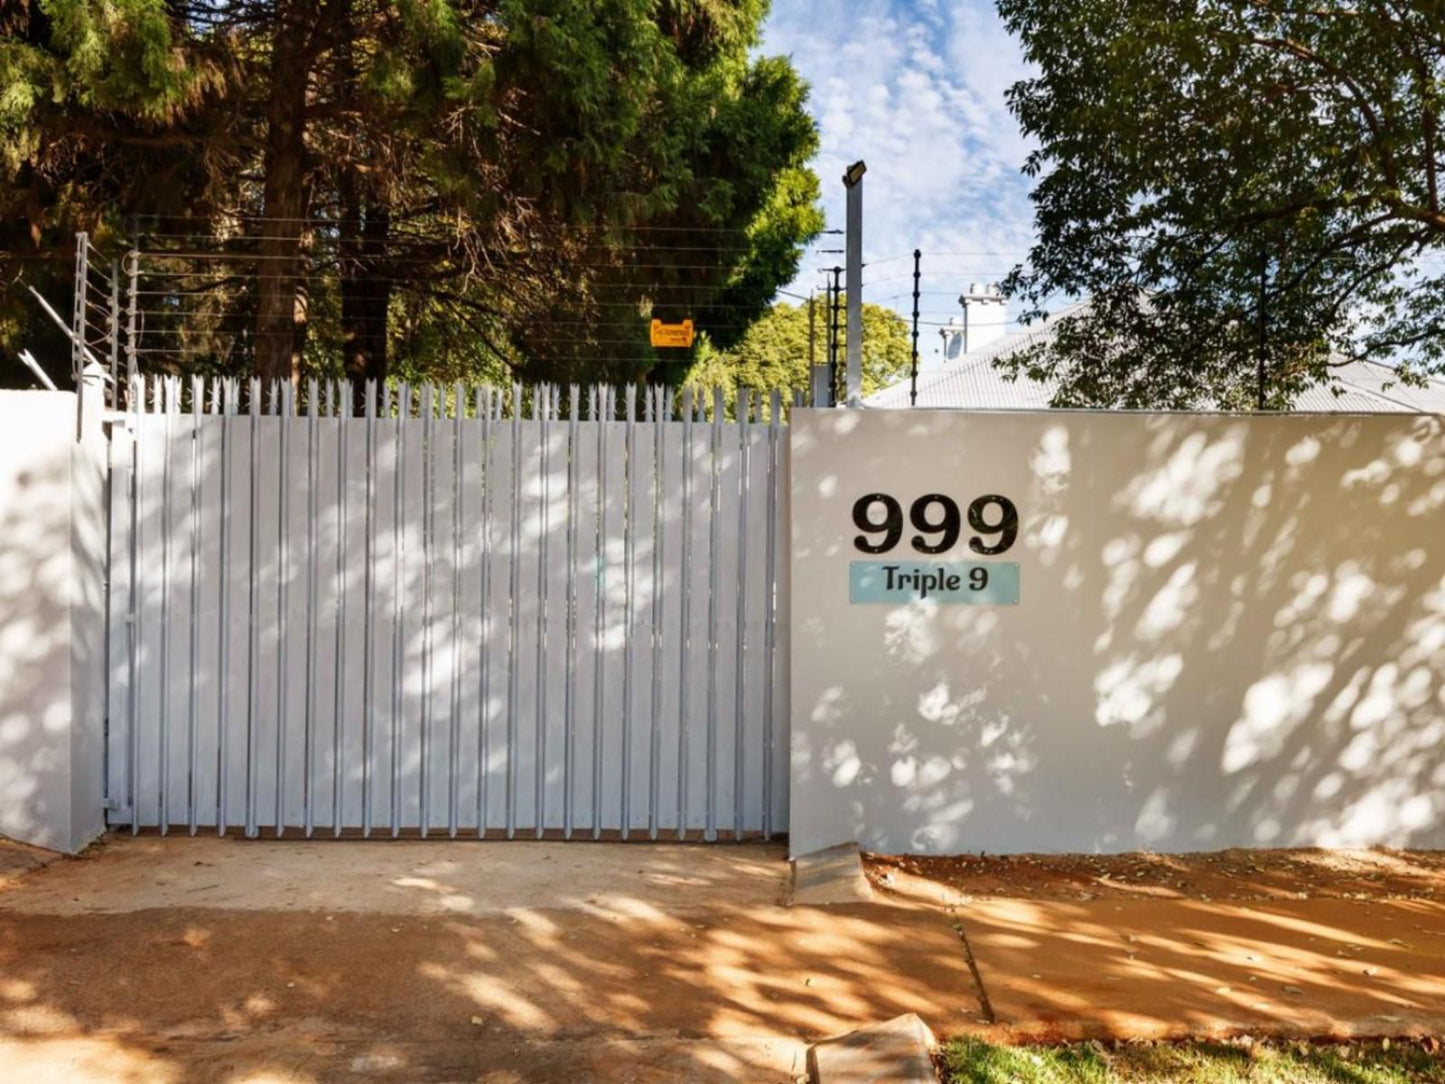 Triple9 Hatfield Guesthouse Hatfield Pretoria Tshwane Gauteng South Africa Gate, Architecture, Shipping Container, Sign